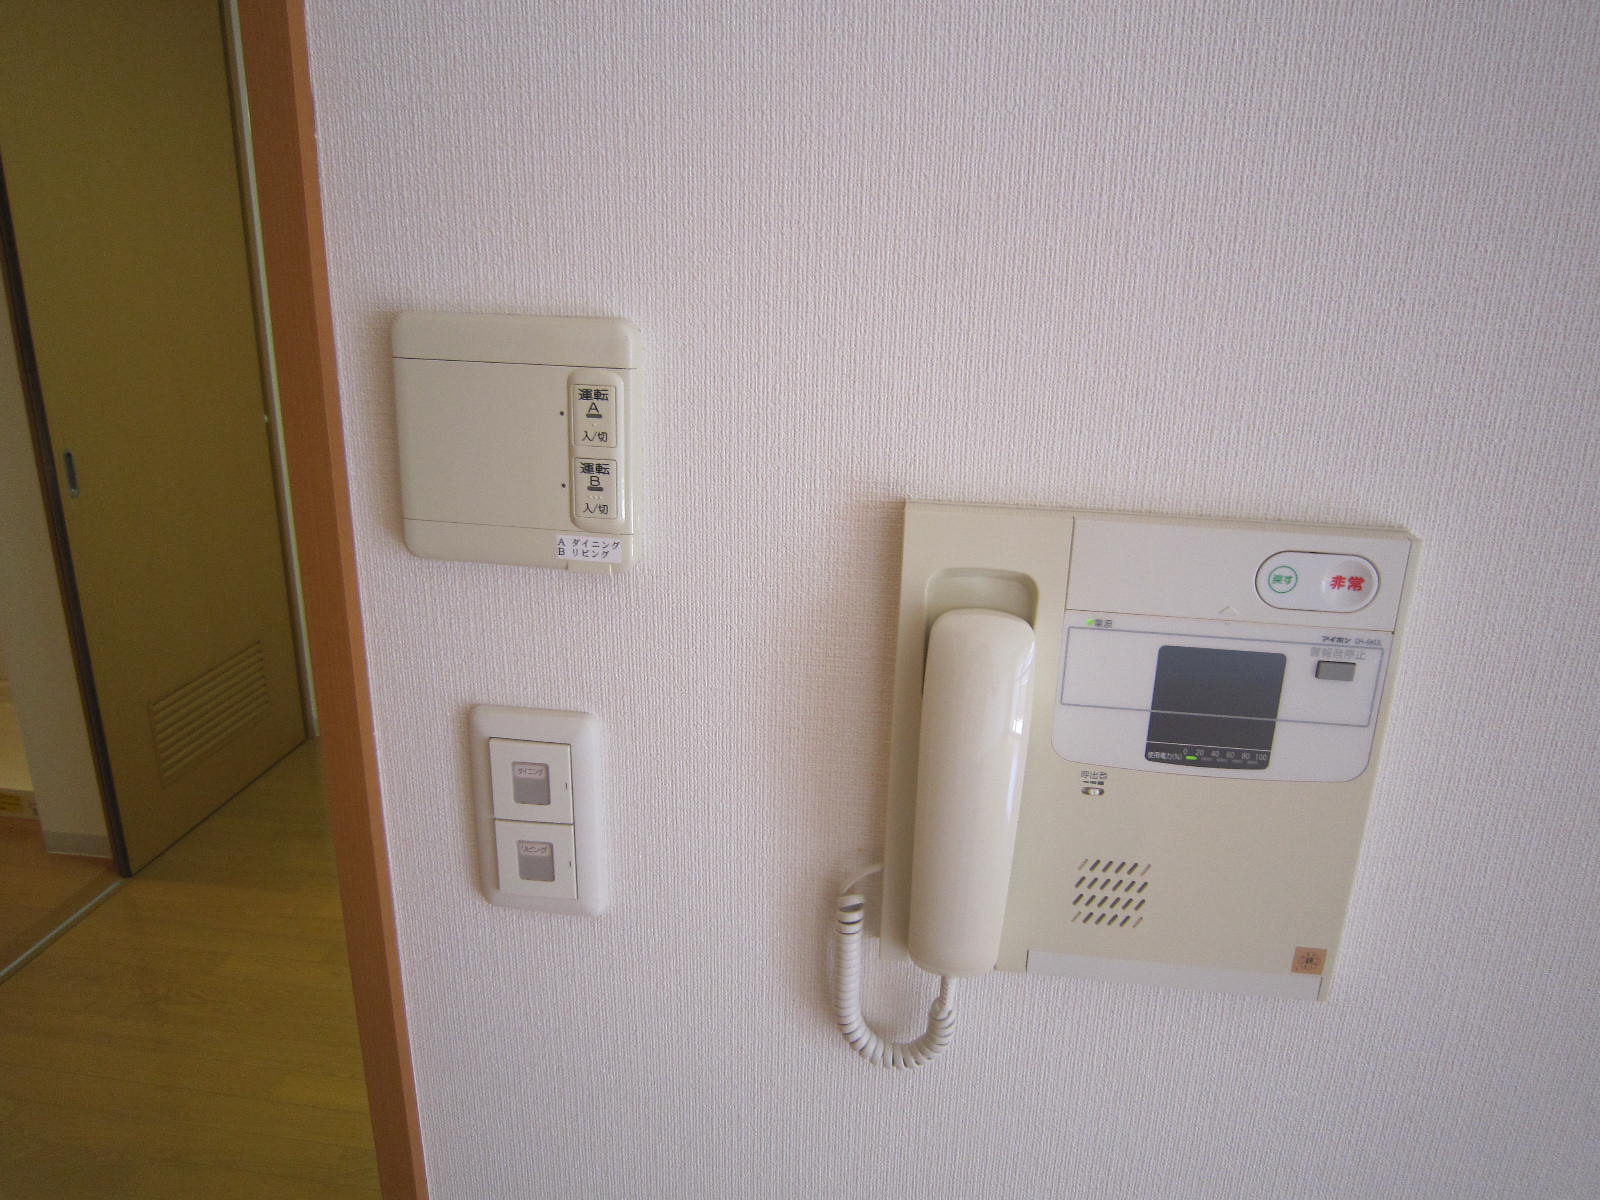 Security. There intercom